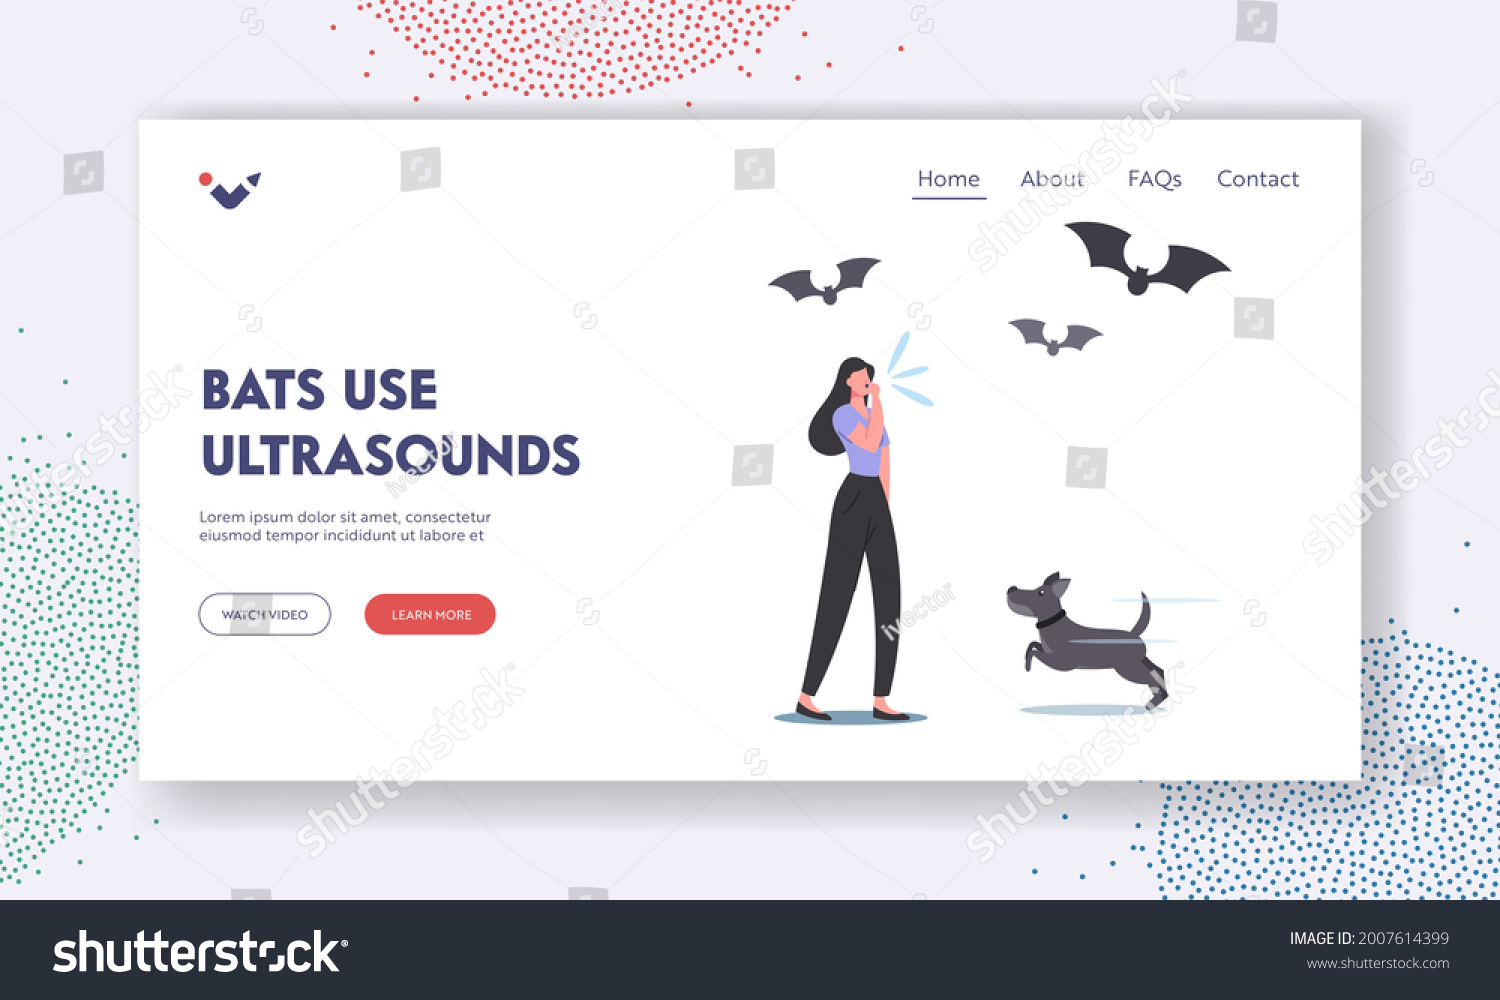 SVG of Bats Use Ultrasound Landing Page Template. Female Character Whistle Call Dog during Outdoor Walk or Training, Bats and Doggy Listen Ultra Sound Frequency Waves. Cartoon People Vector Illustration svg